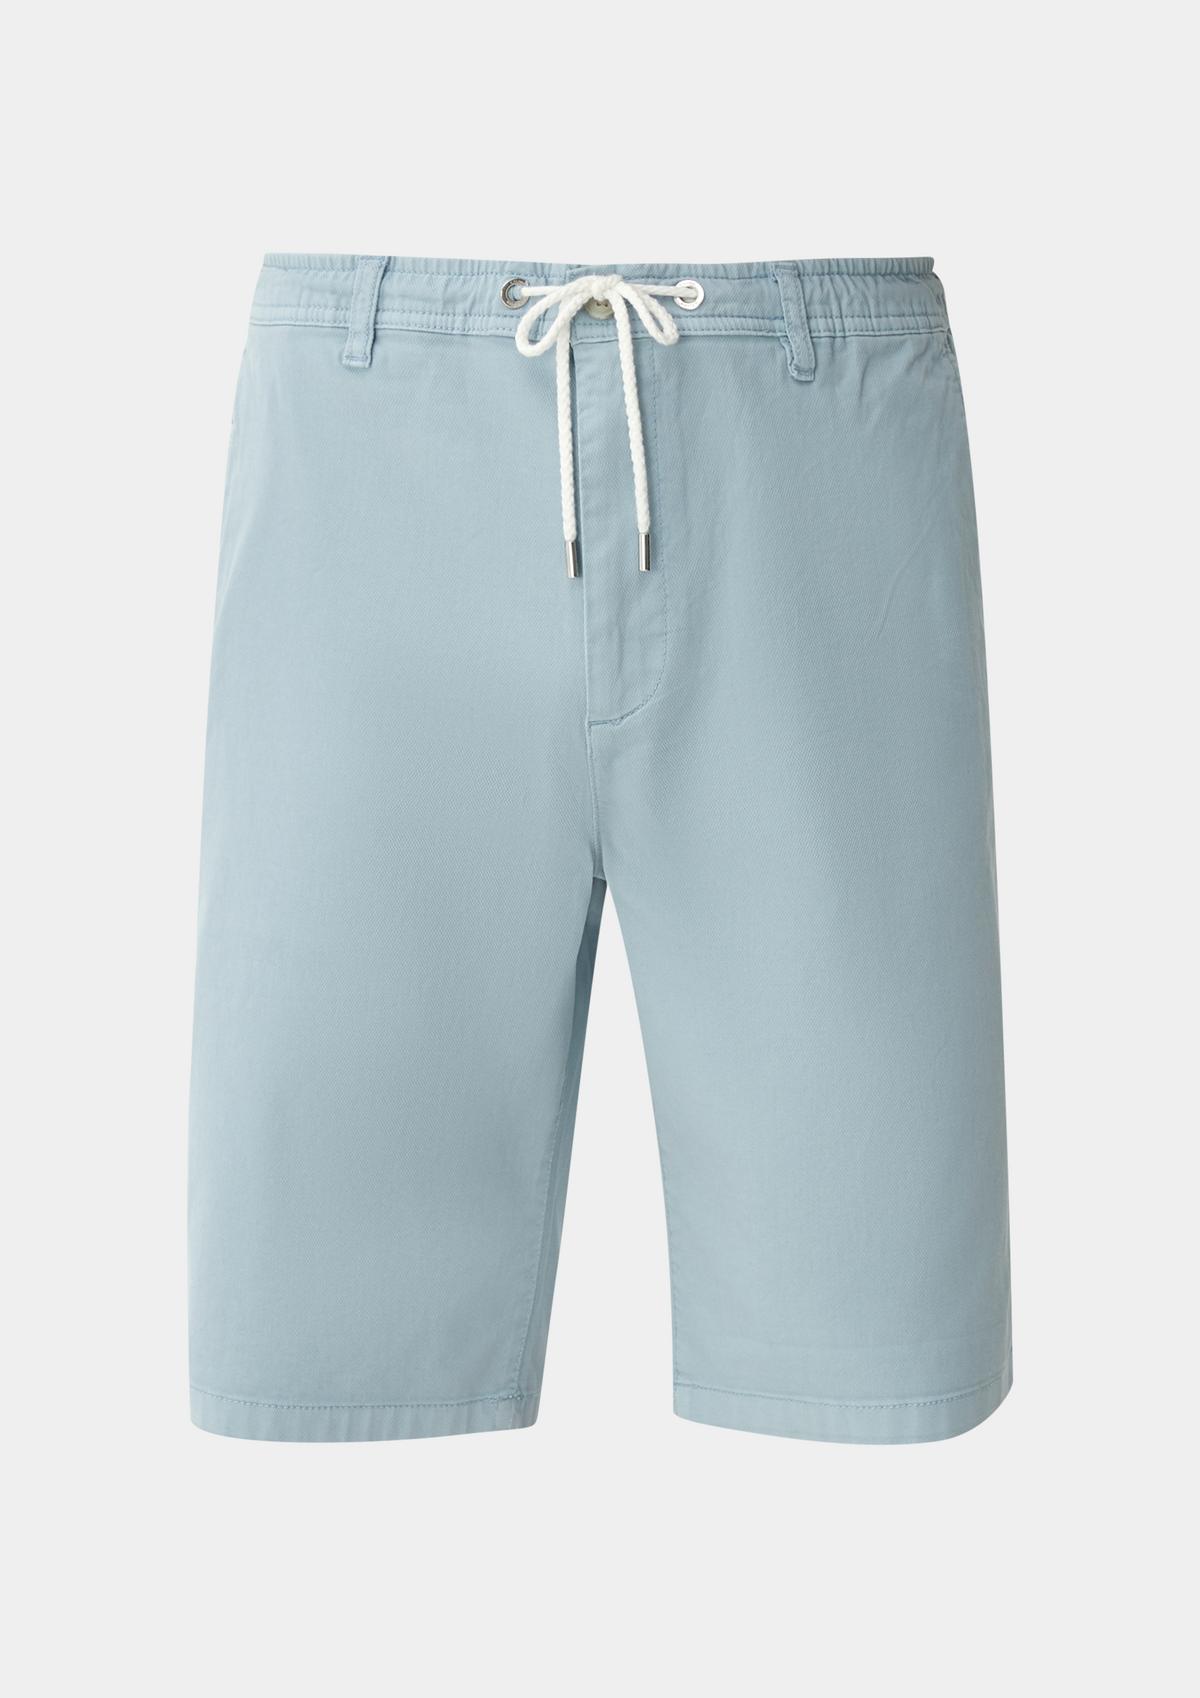 with Relaxed Bermuda rose drawstring fit: shorts -